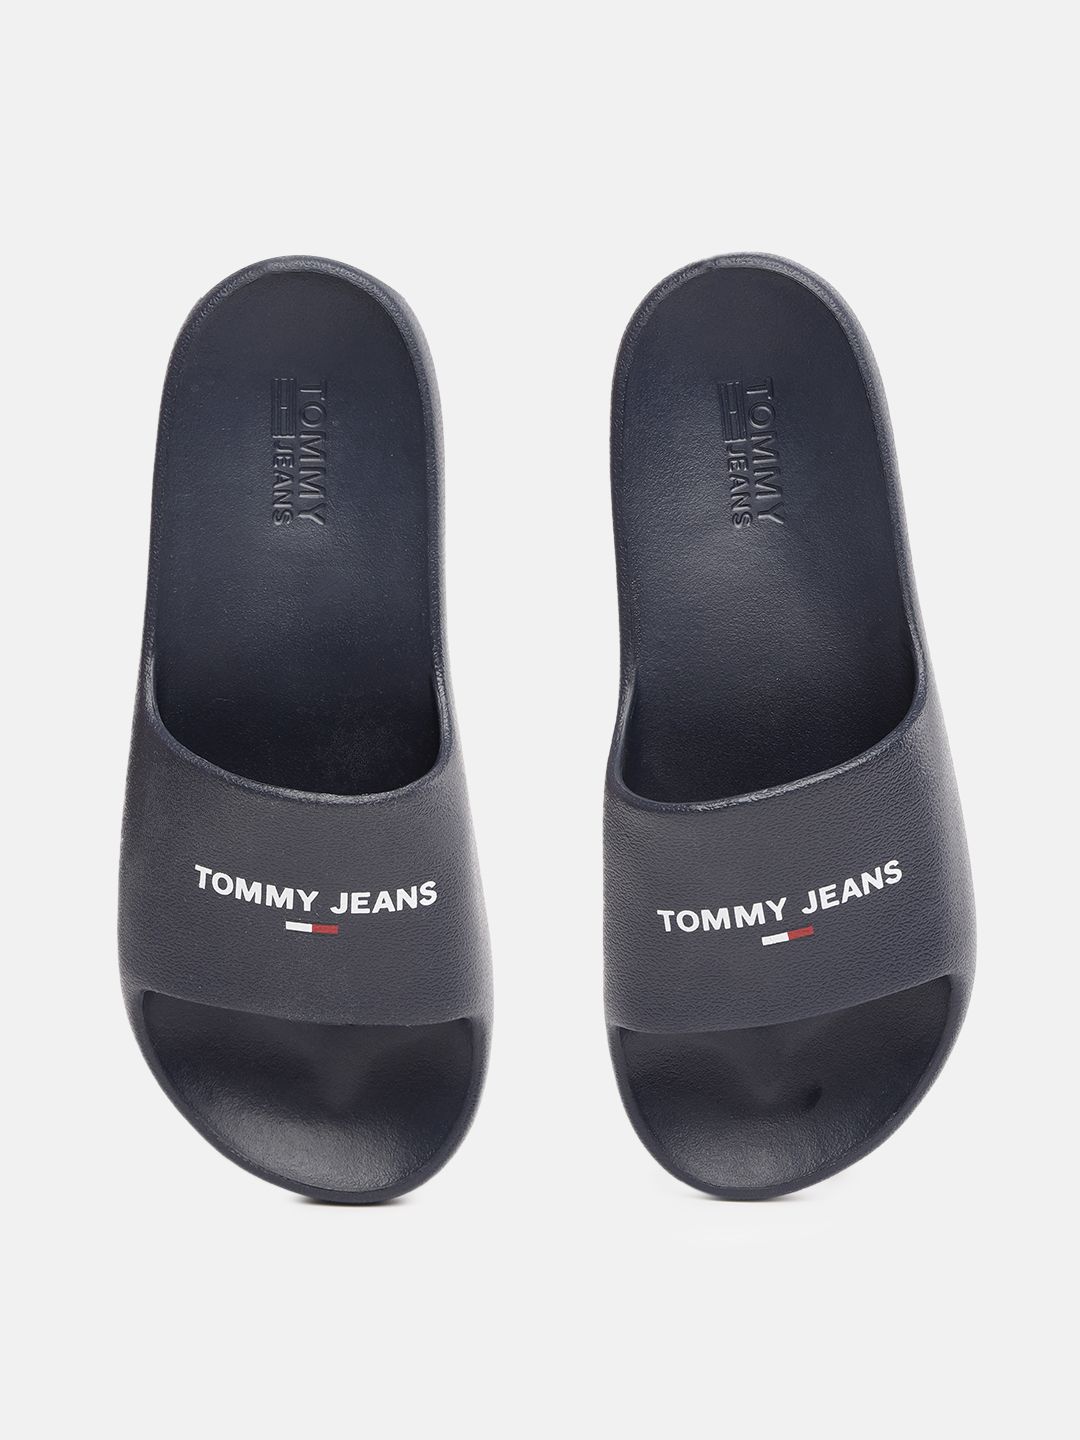 Tommy Hilfiger Women Navy Blue Brand Logo Printed Sliders Price in India